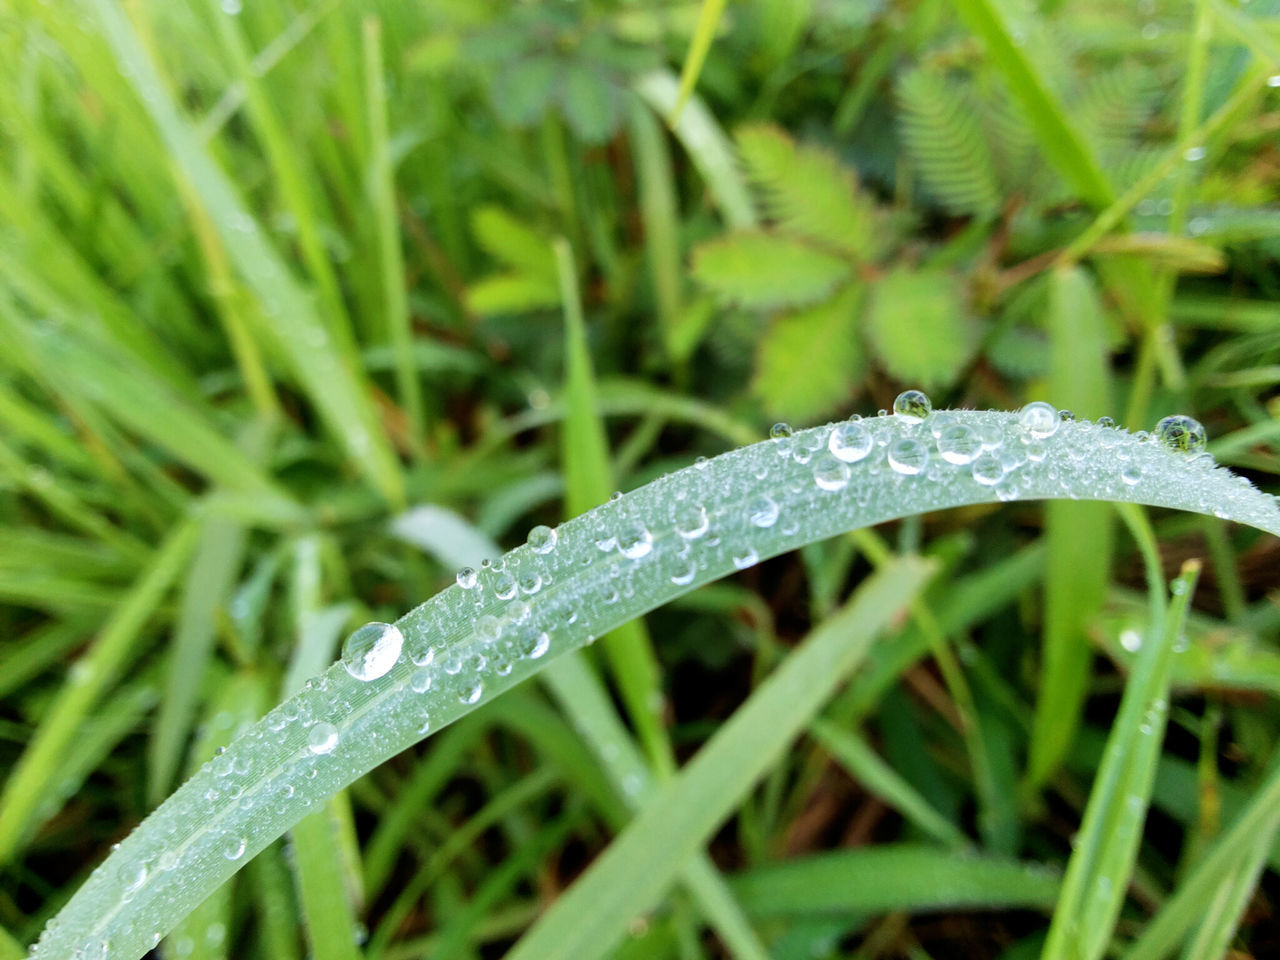 drop, grass, wet, green color, water, close-up, growth, blade of grass, dew, nature, freshness, beauty in nature, field, selective focus, focus on foreground, raindrop, plant, rain, fragility, droplet